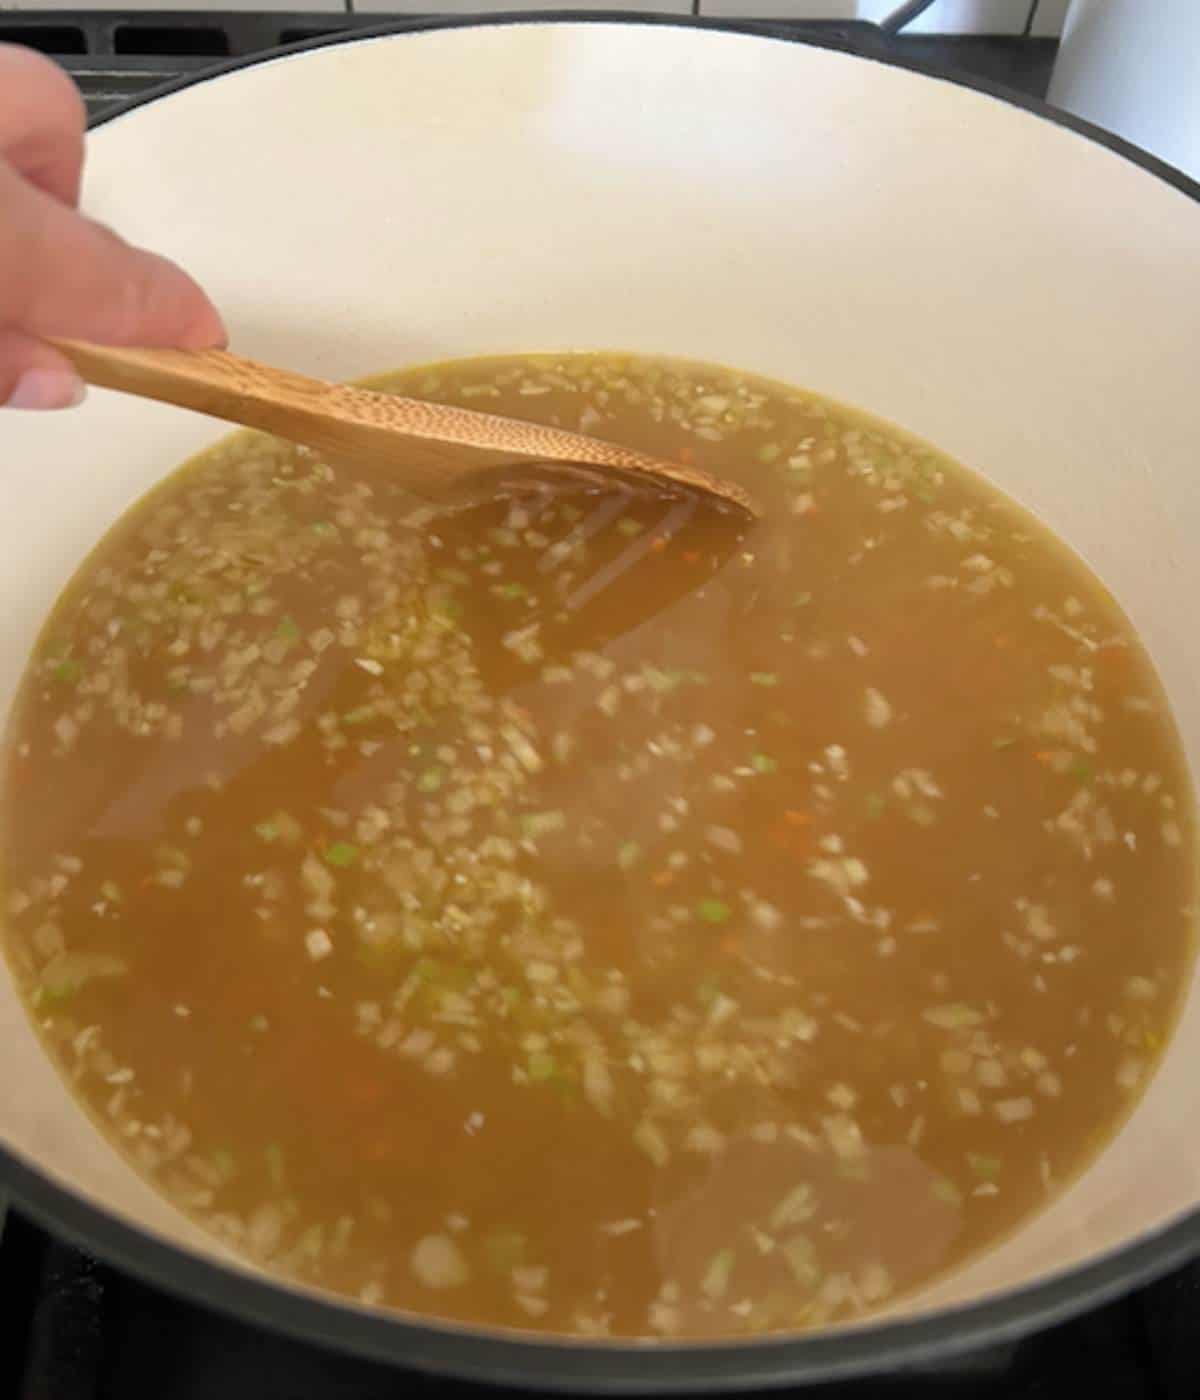 Hand stirring pastina into soup with wooden spoon.